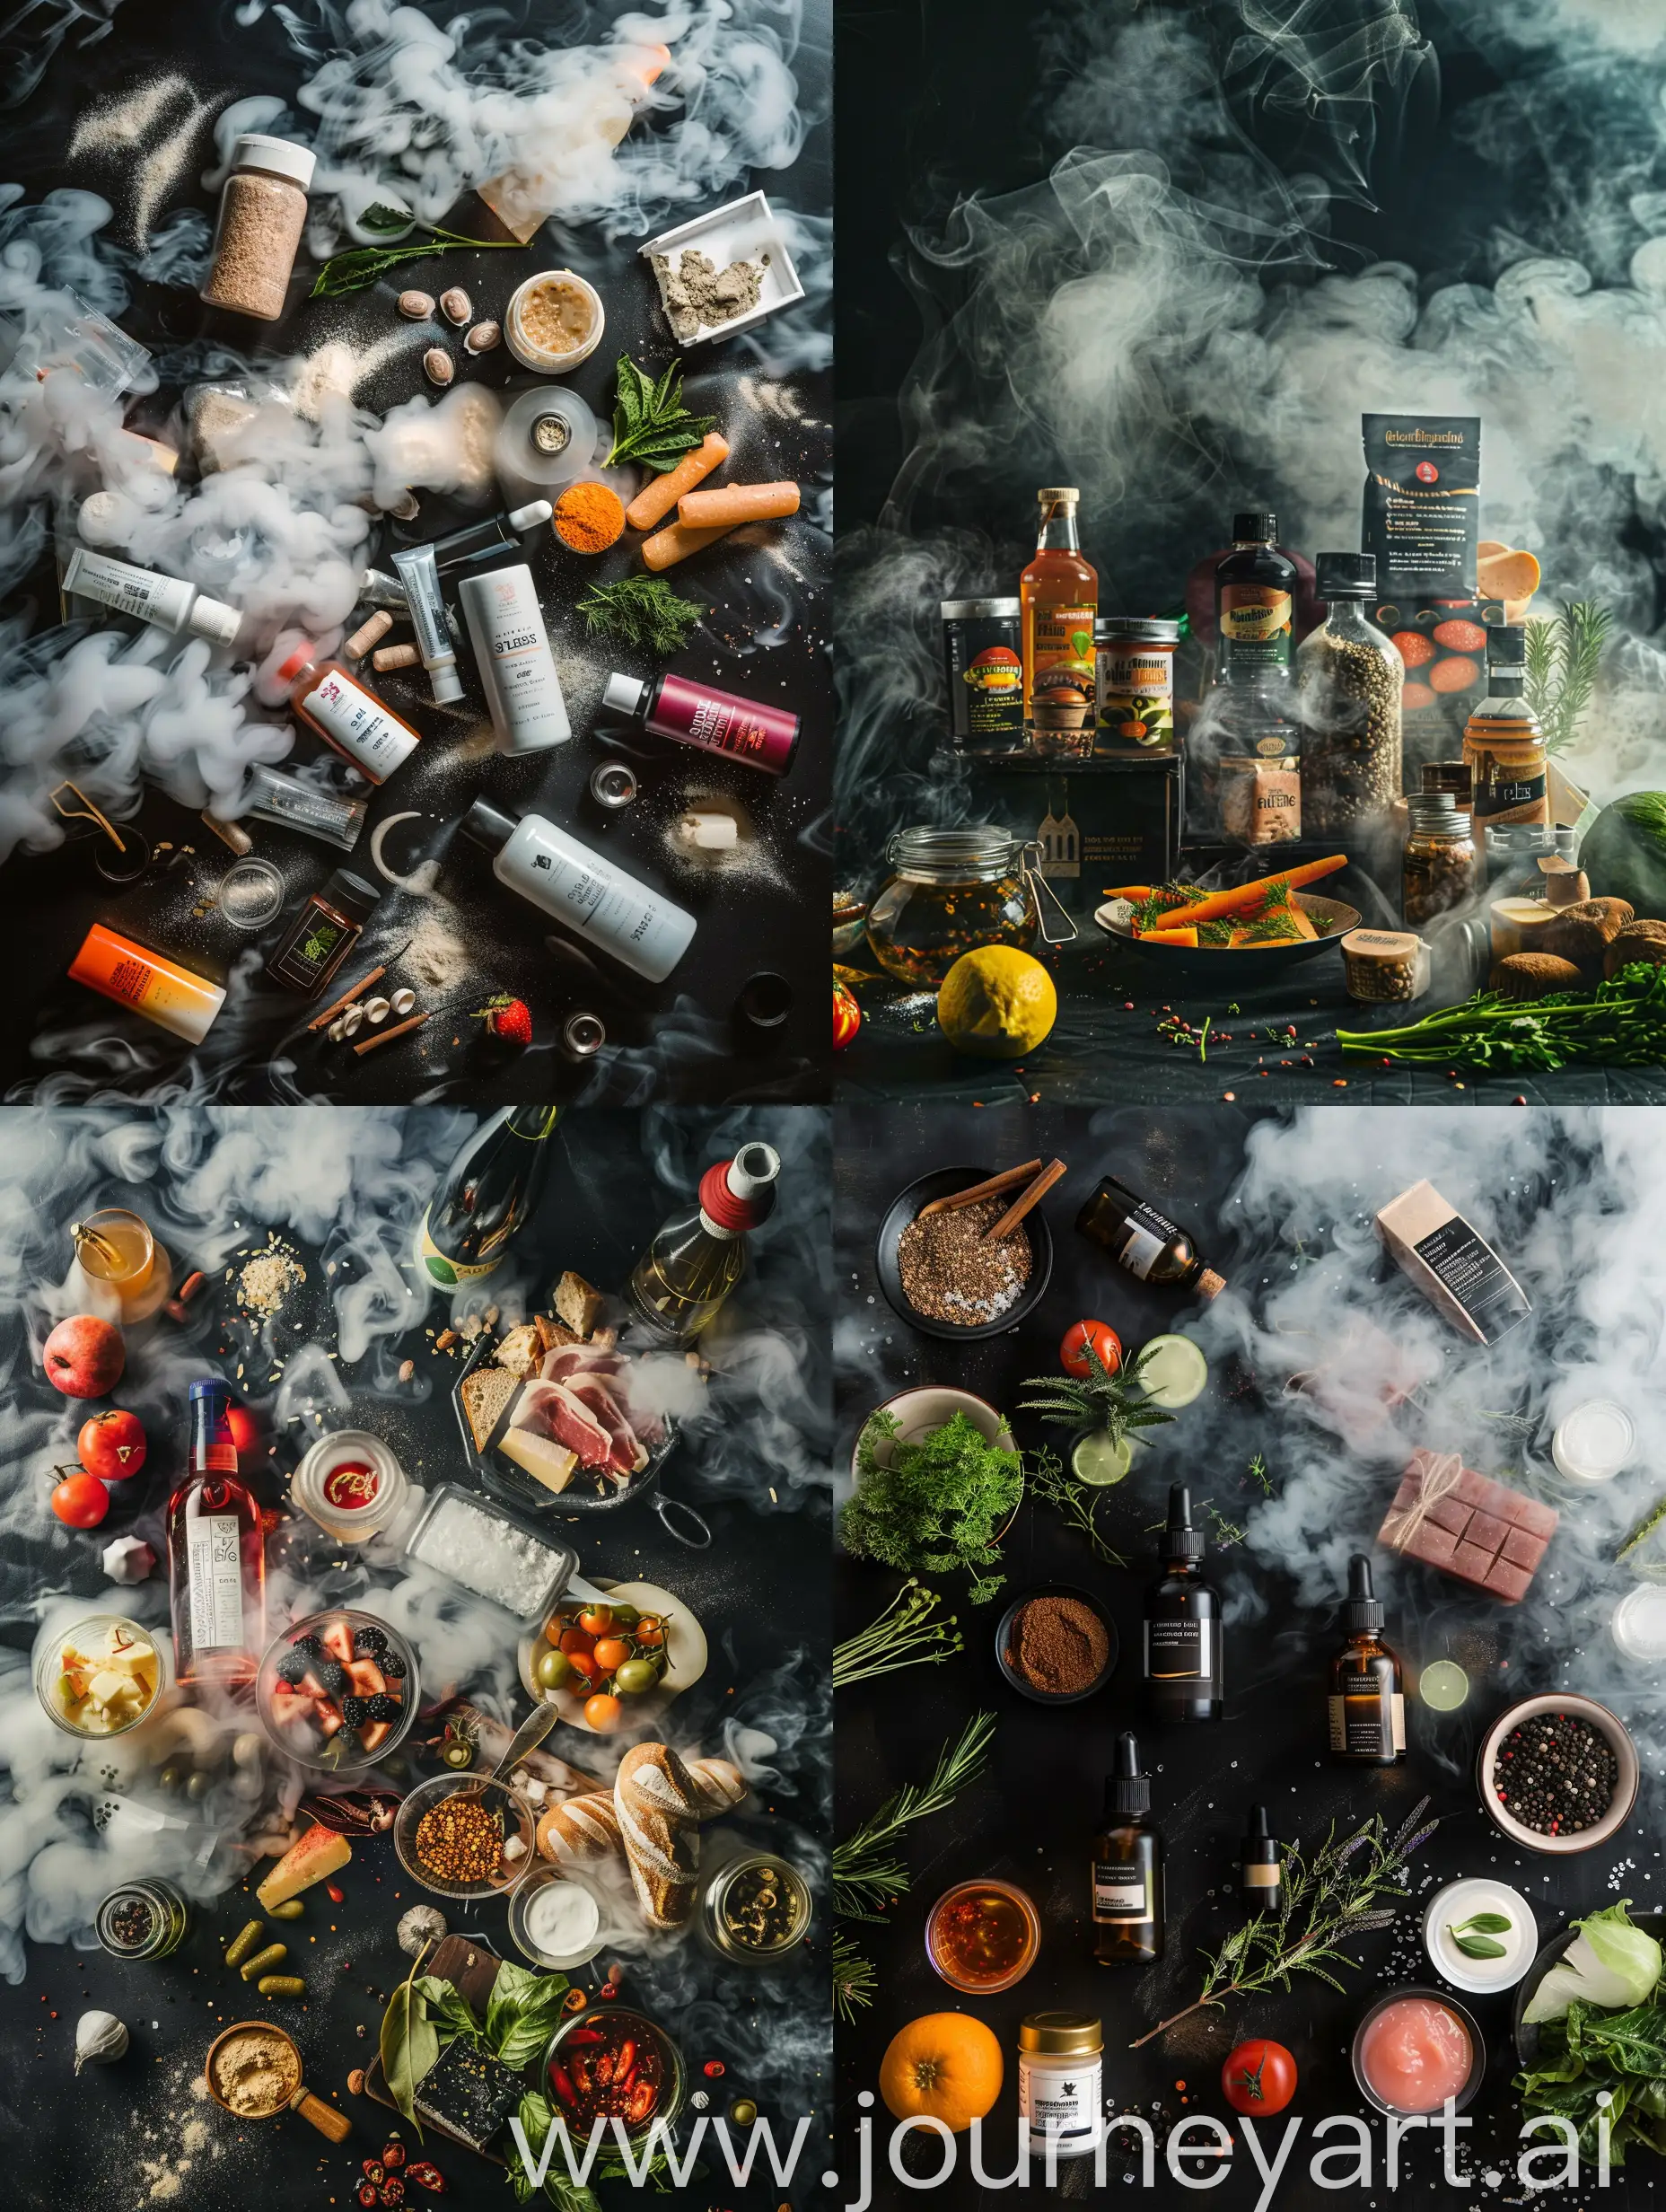 Captivating-Chaos-Aesthetic-Food-Photography-with-Smoke-on-Black-Background